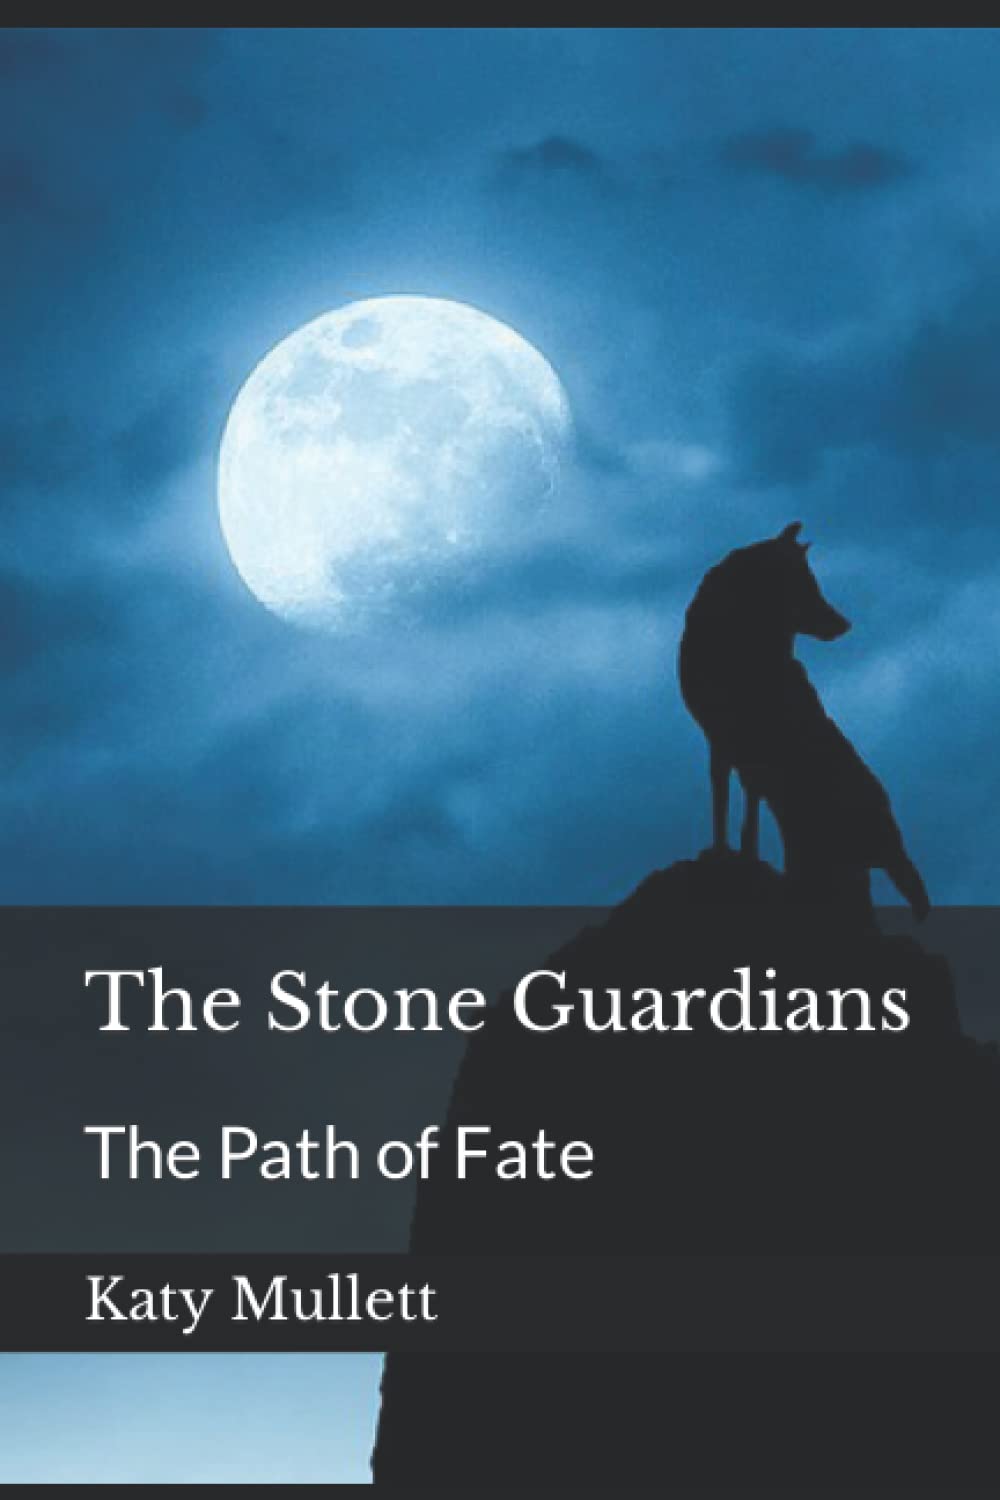 The Stone Guardians